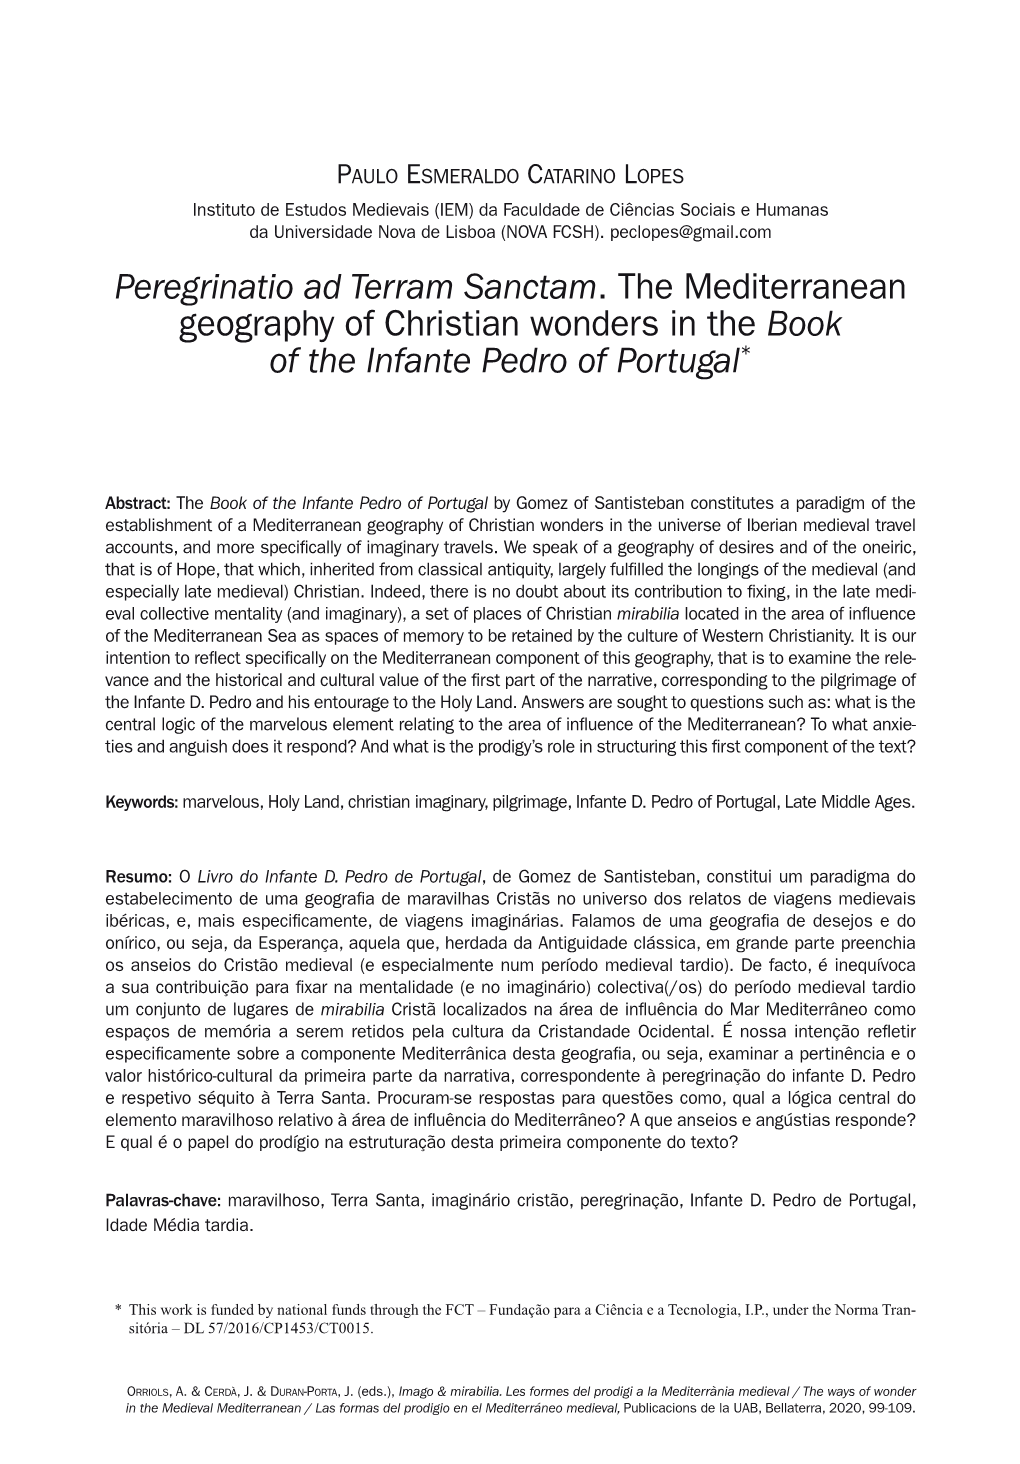 Peregrinatio Ad Terram Sanctam. the Mediterranean Geography of Christian Wonders in the Book of the Infante Pedro of Portugal*